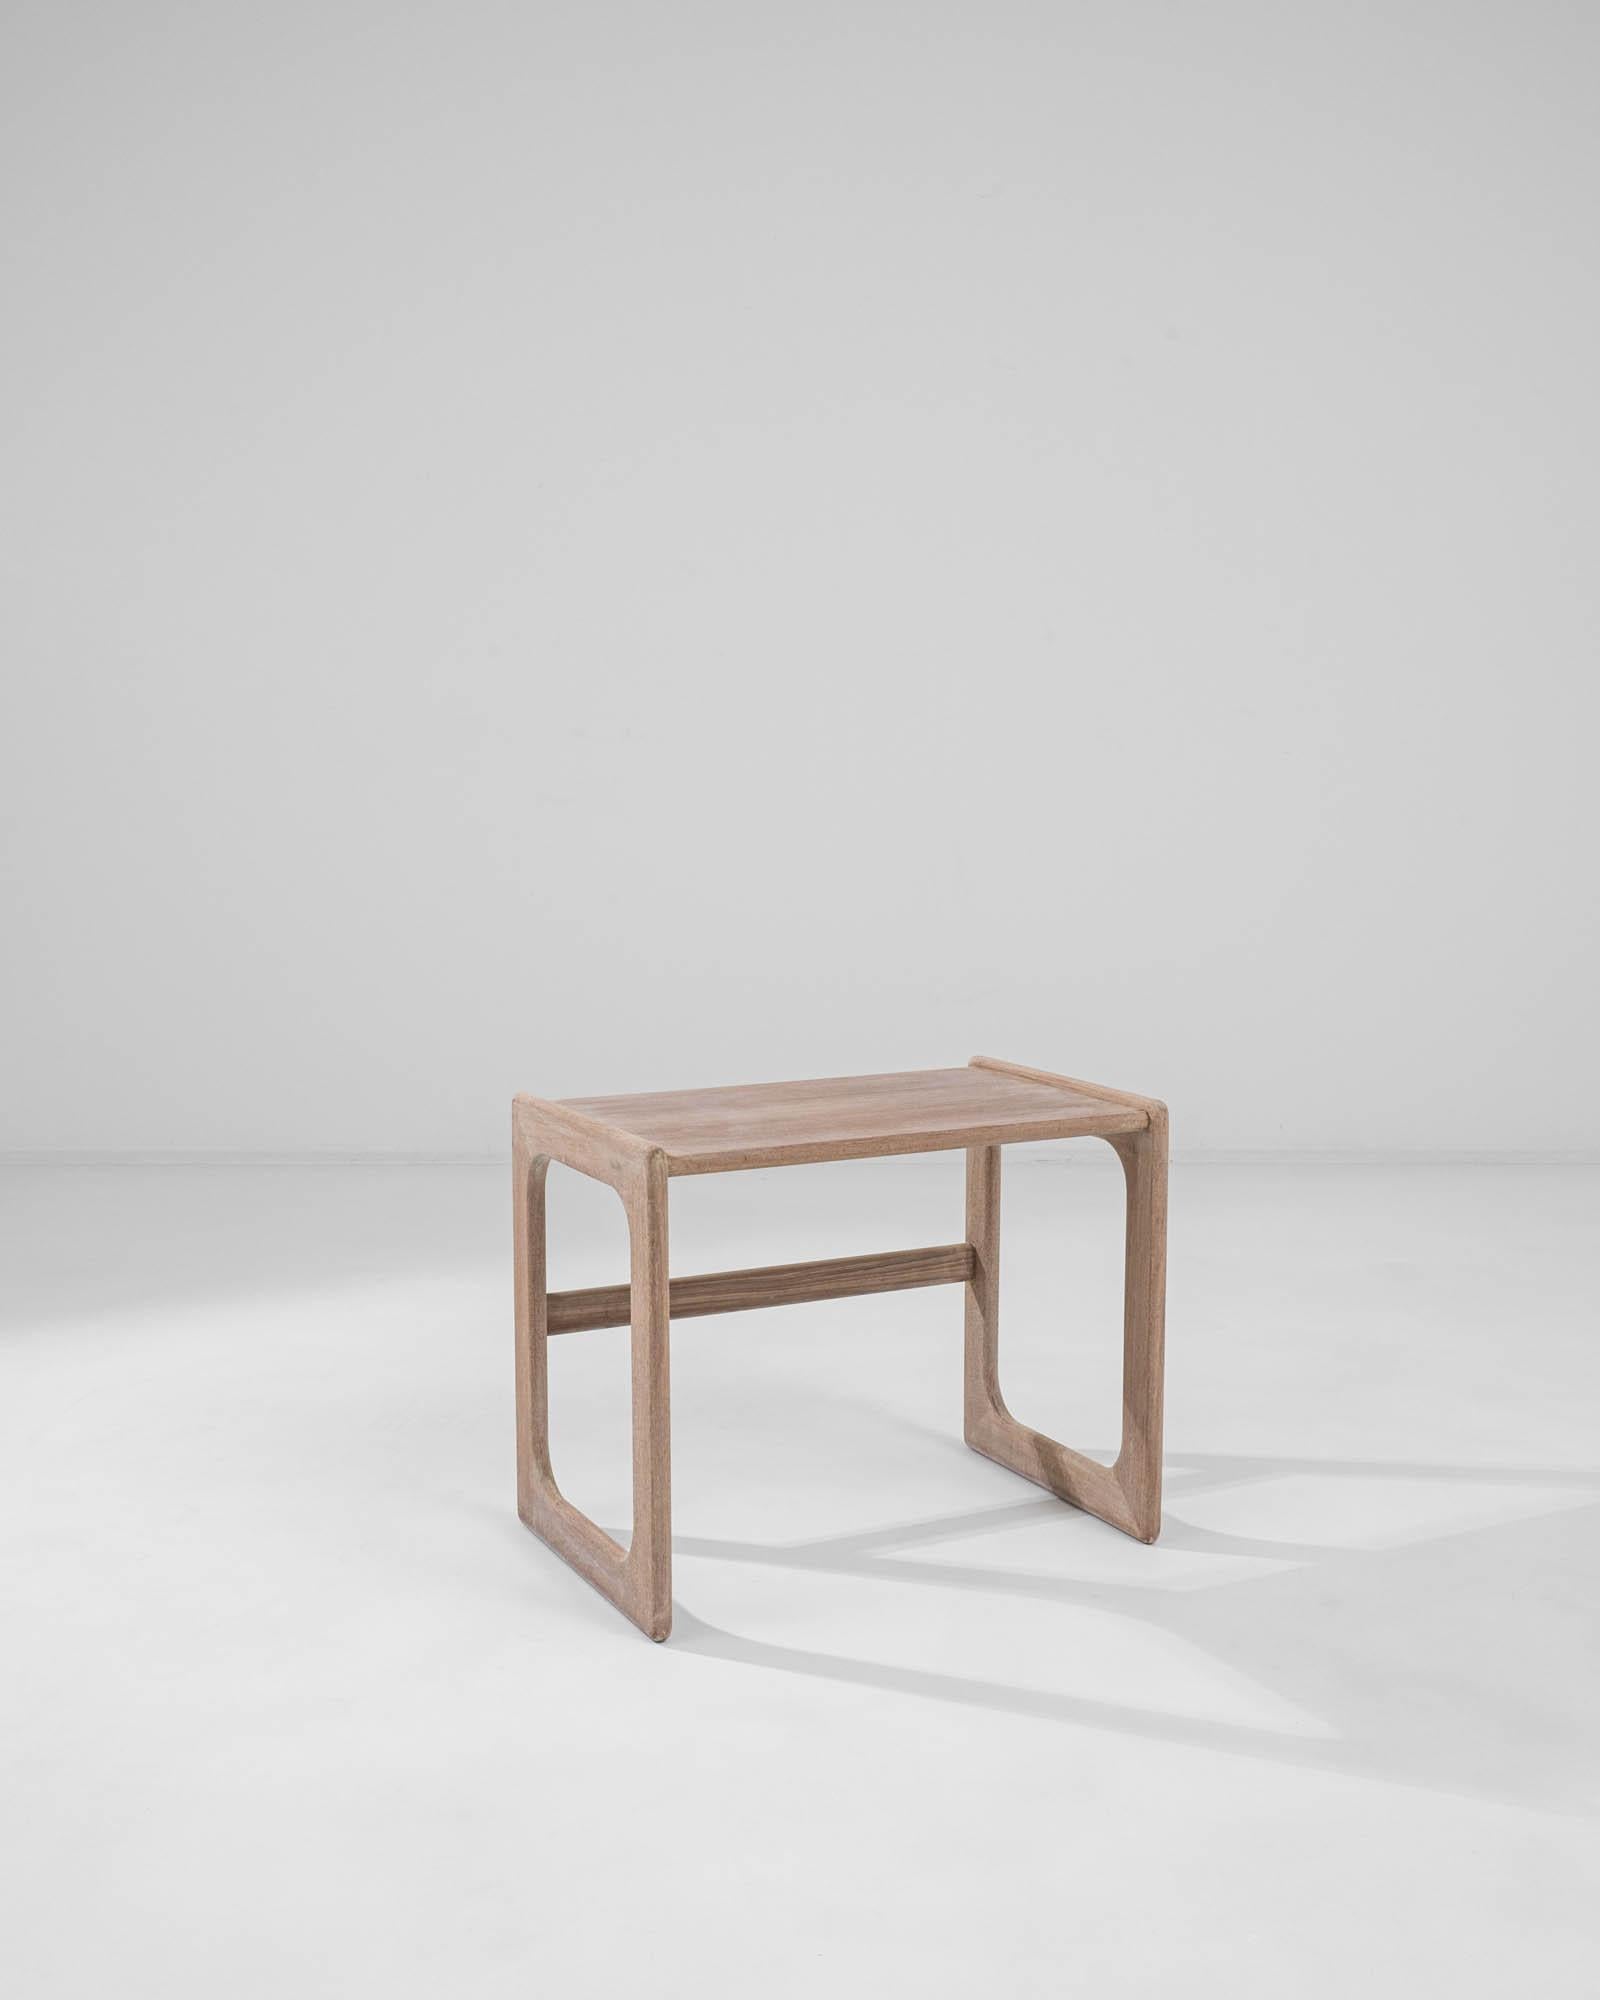 This Danish table, made circa 1970, is composed with a sharp modernist design. Elegantly minimal, the frame-like legs connect to a flat tabletop, their rectangular forms gently rounded to create a play of geometry. Simple forms are highlighted by a